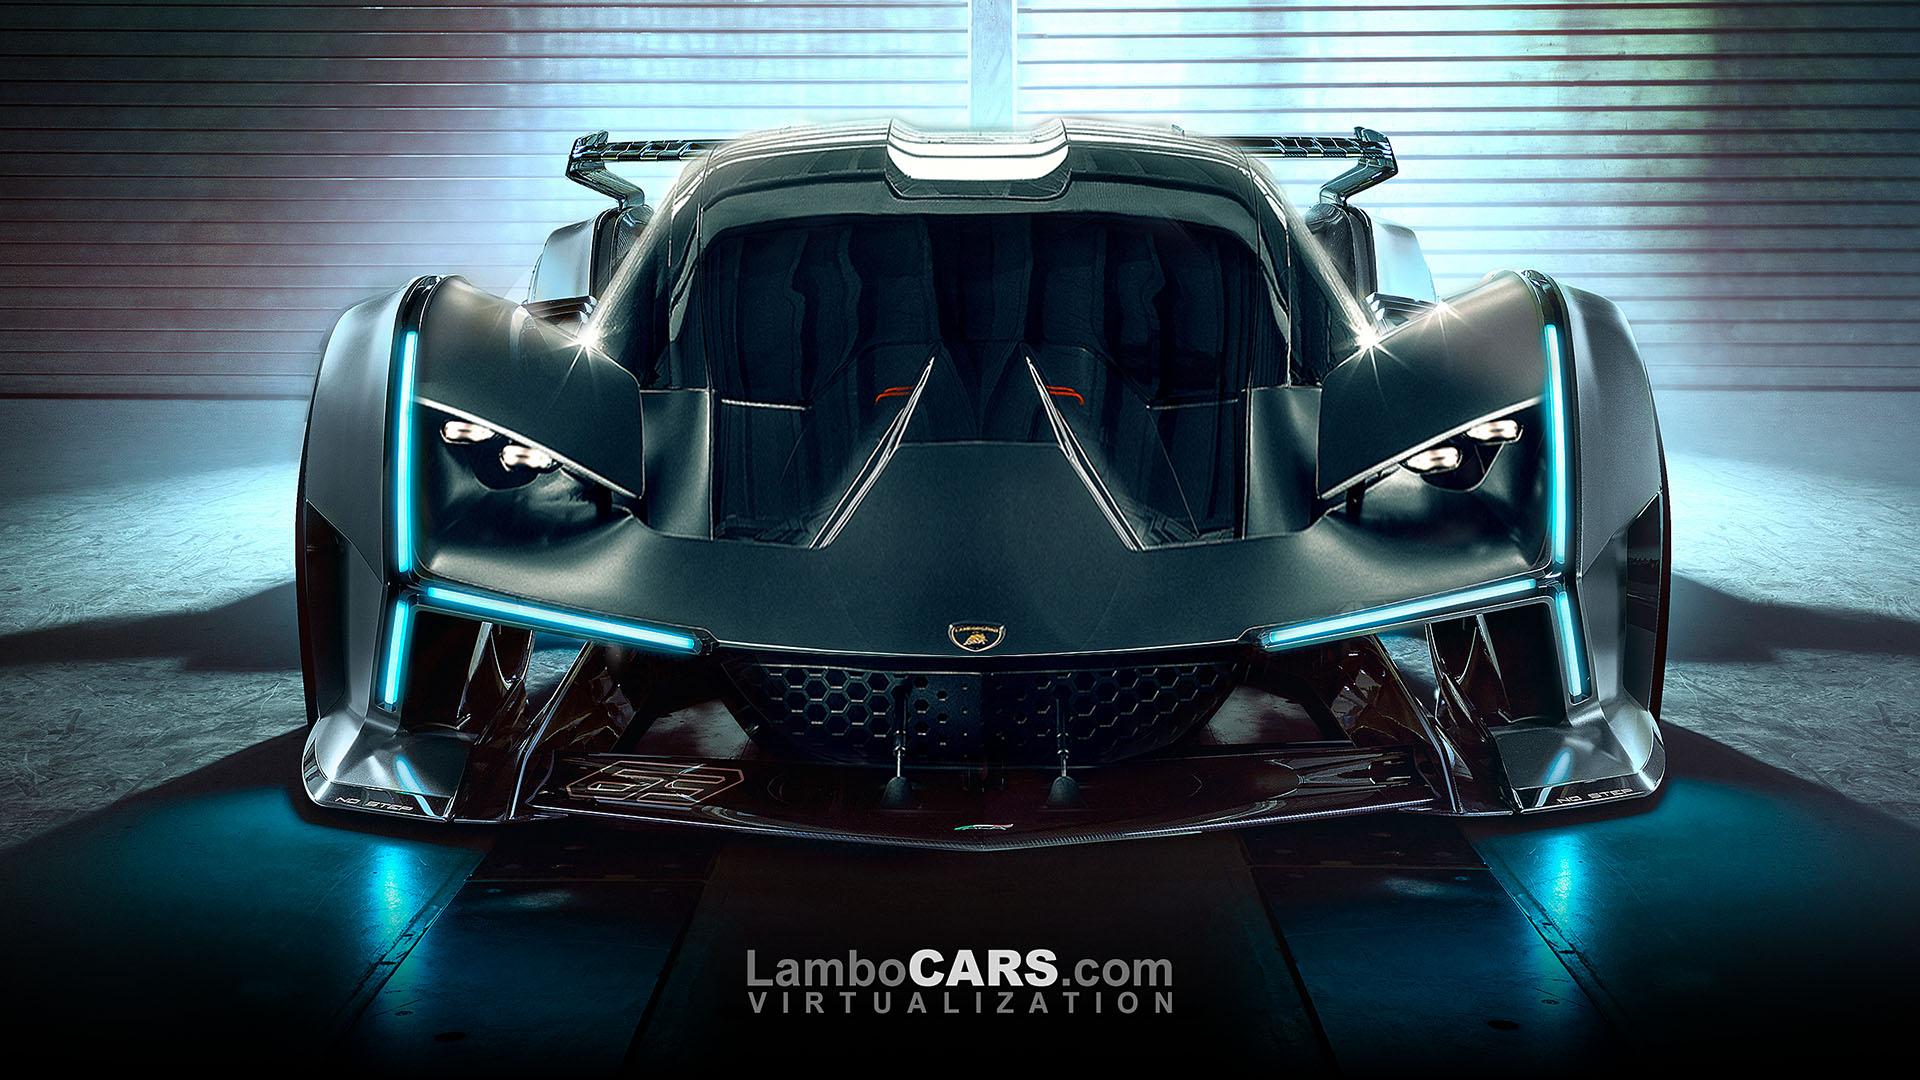 will officially have an LMDh hybrid sports car for the 2024